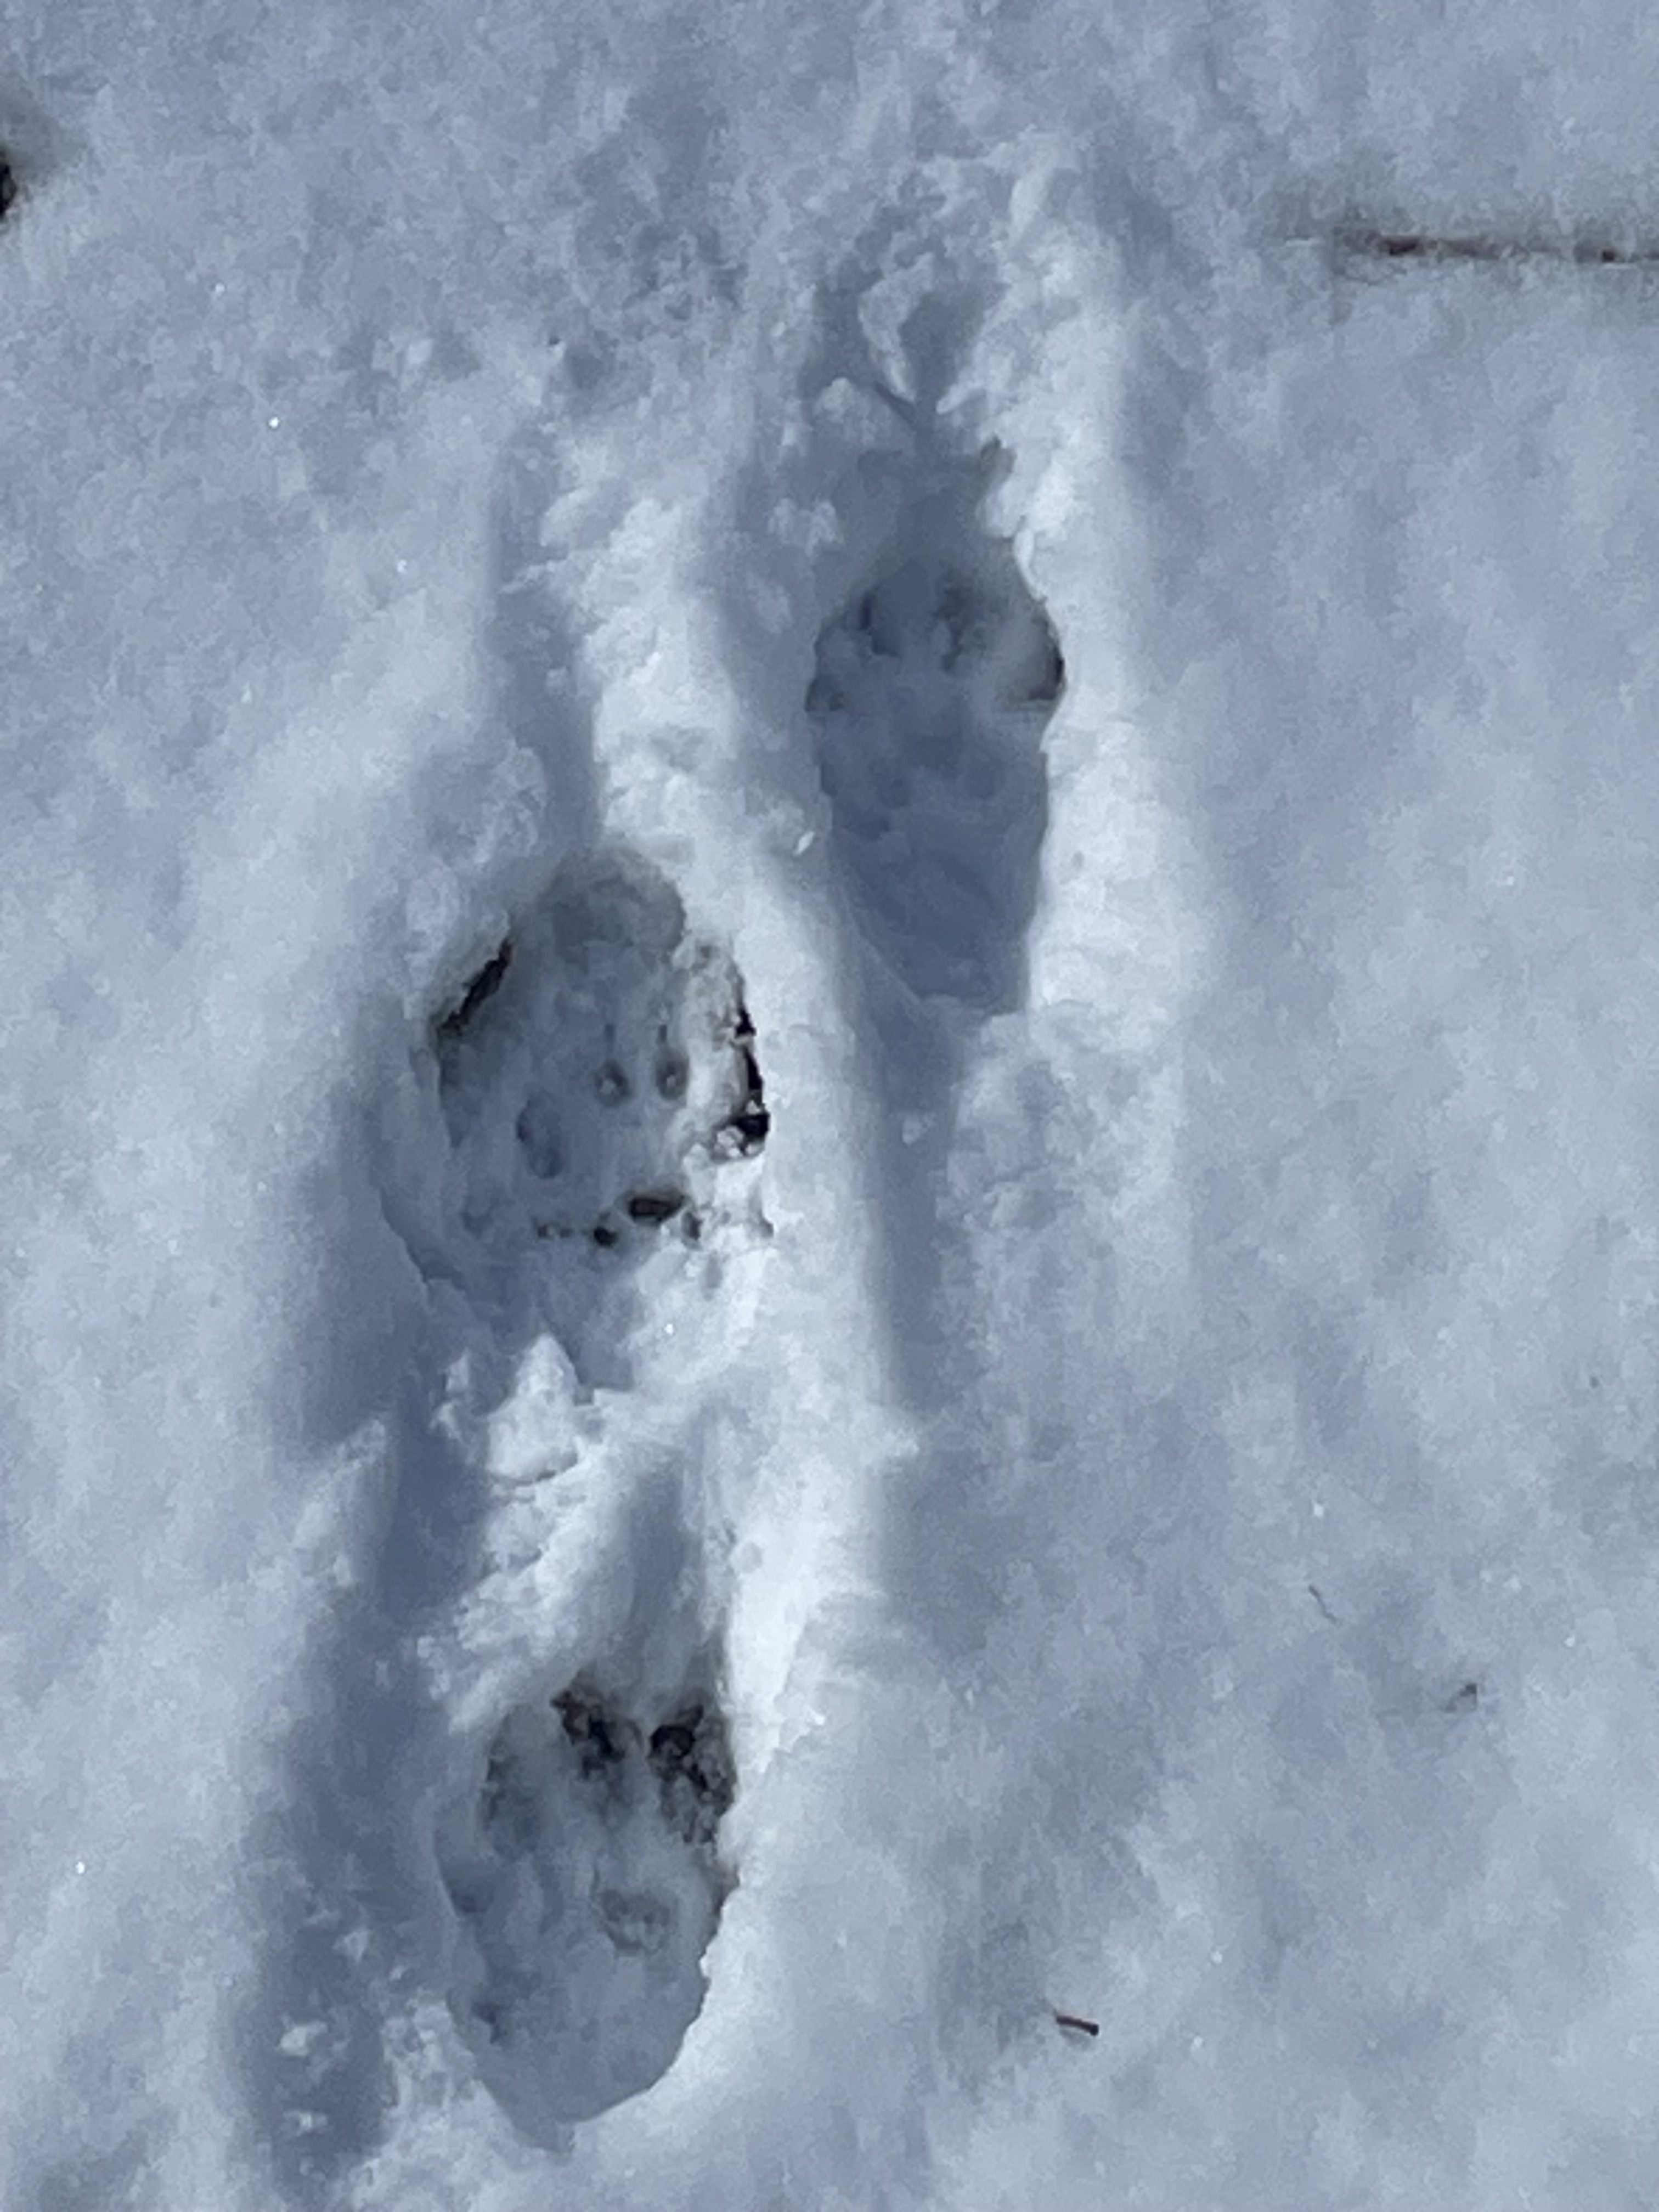 Coyote tracks in the snow